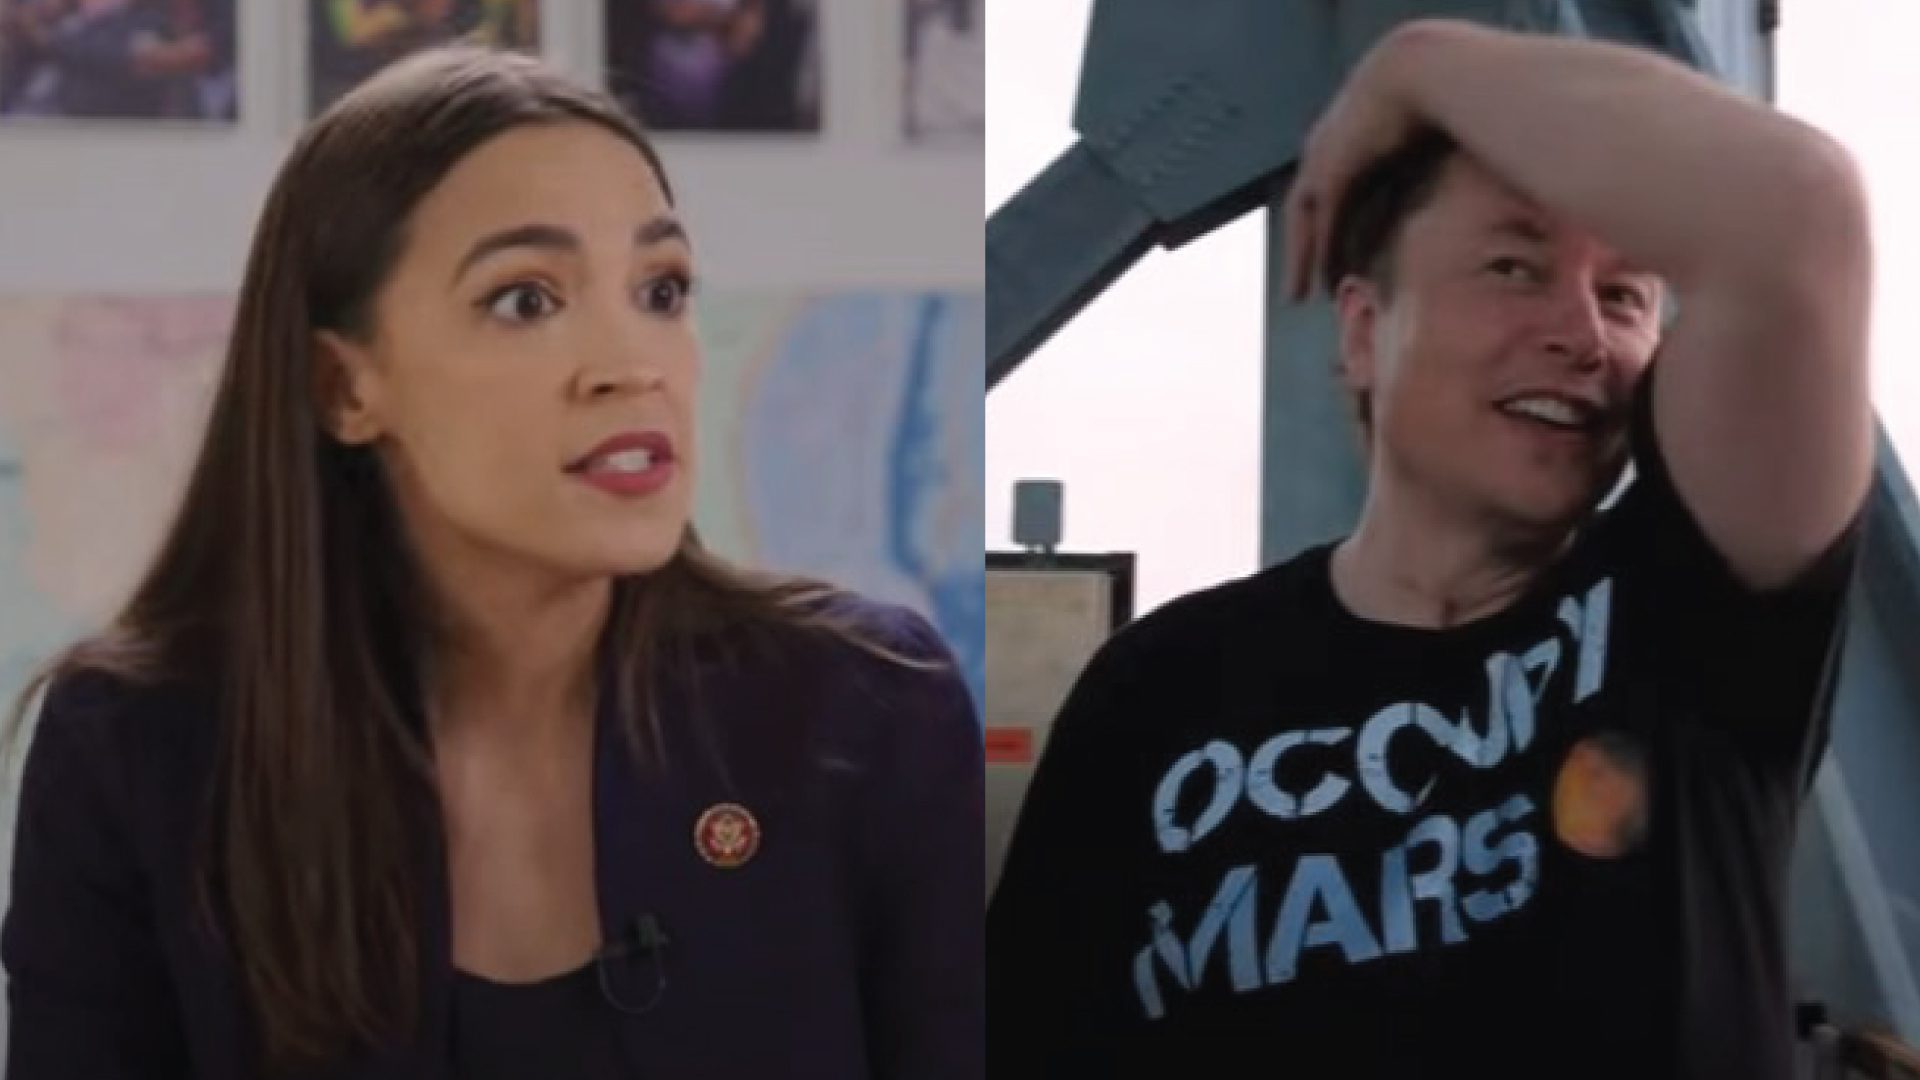 AOC says she wants to get rid of Tesla over Elon Musk